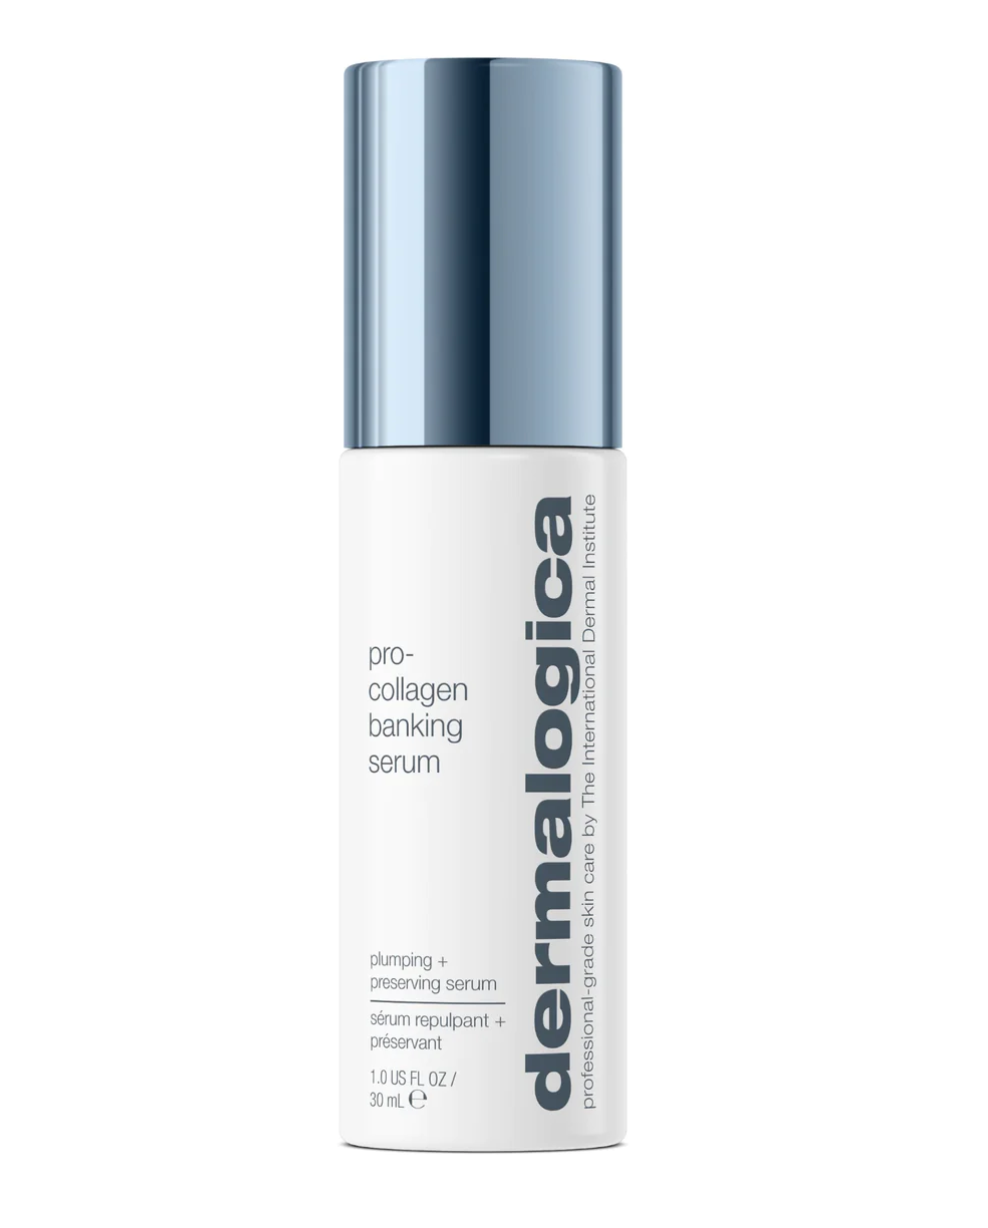 Introducing the New Pro Collagen Banking Serum by Dermalogica